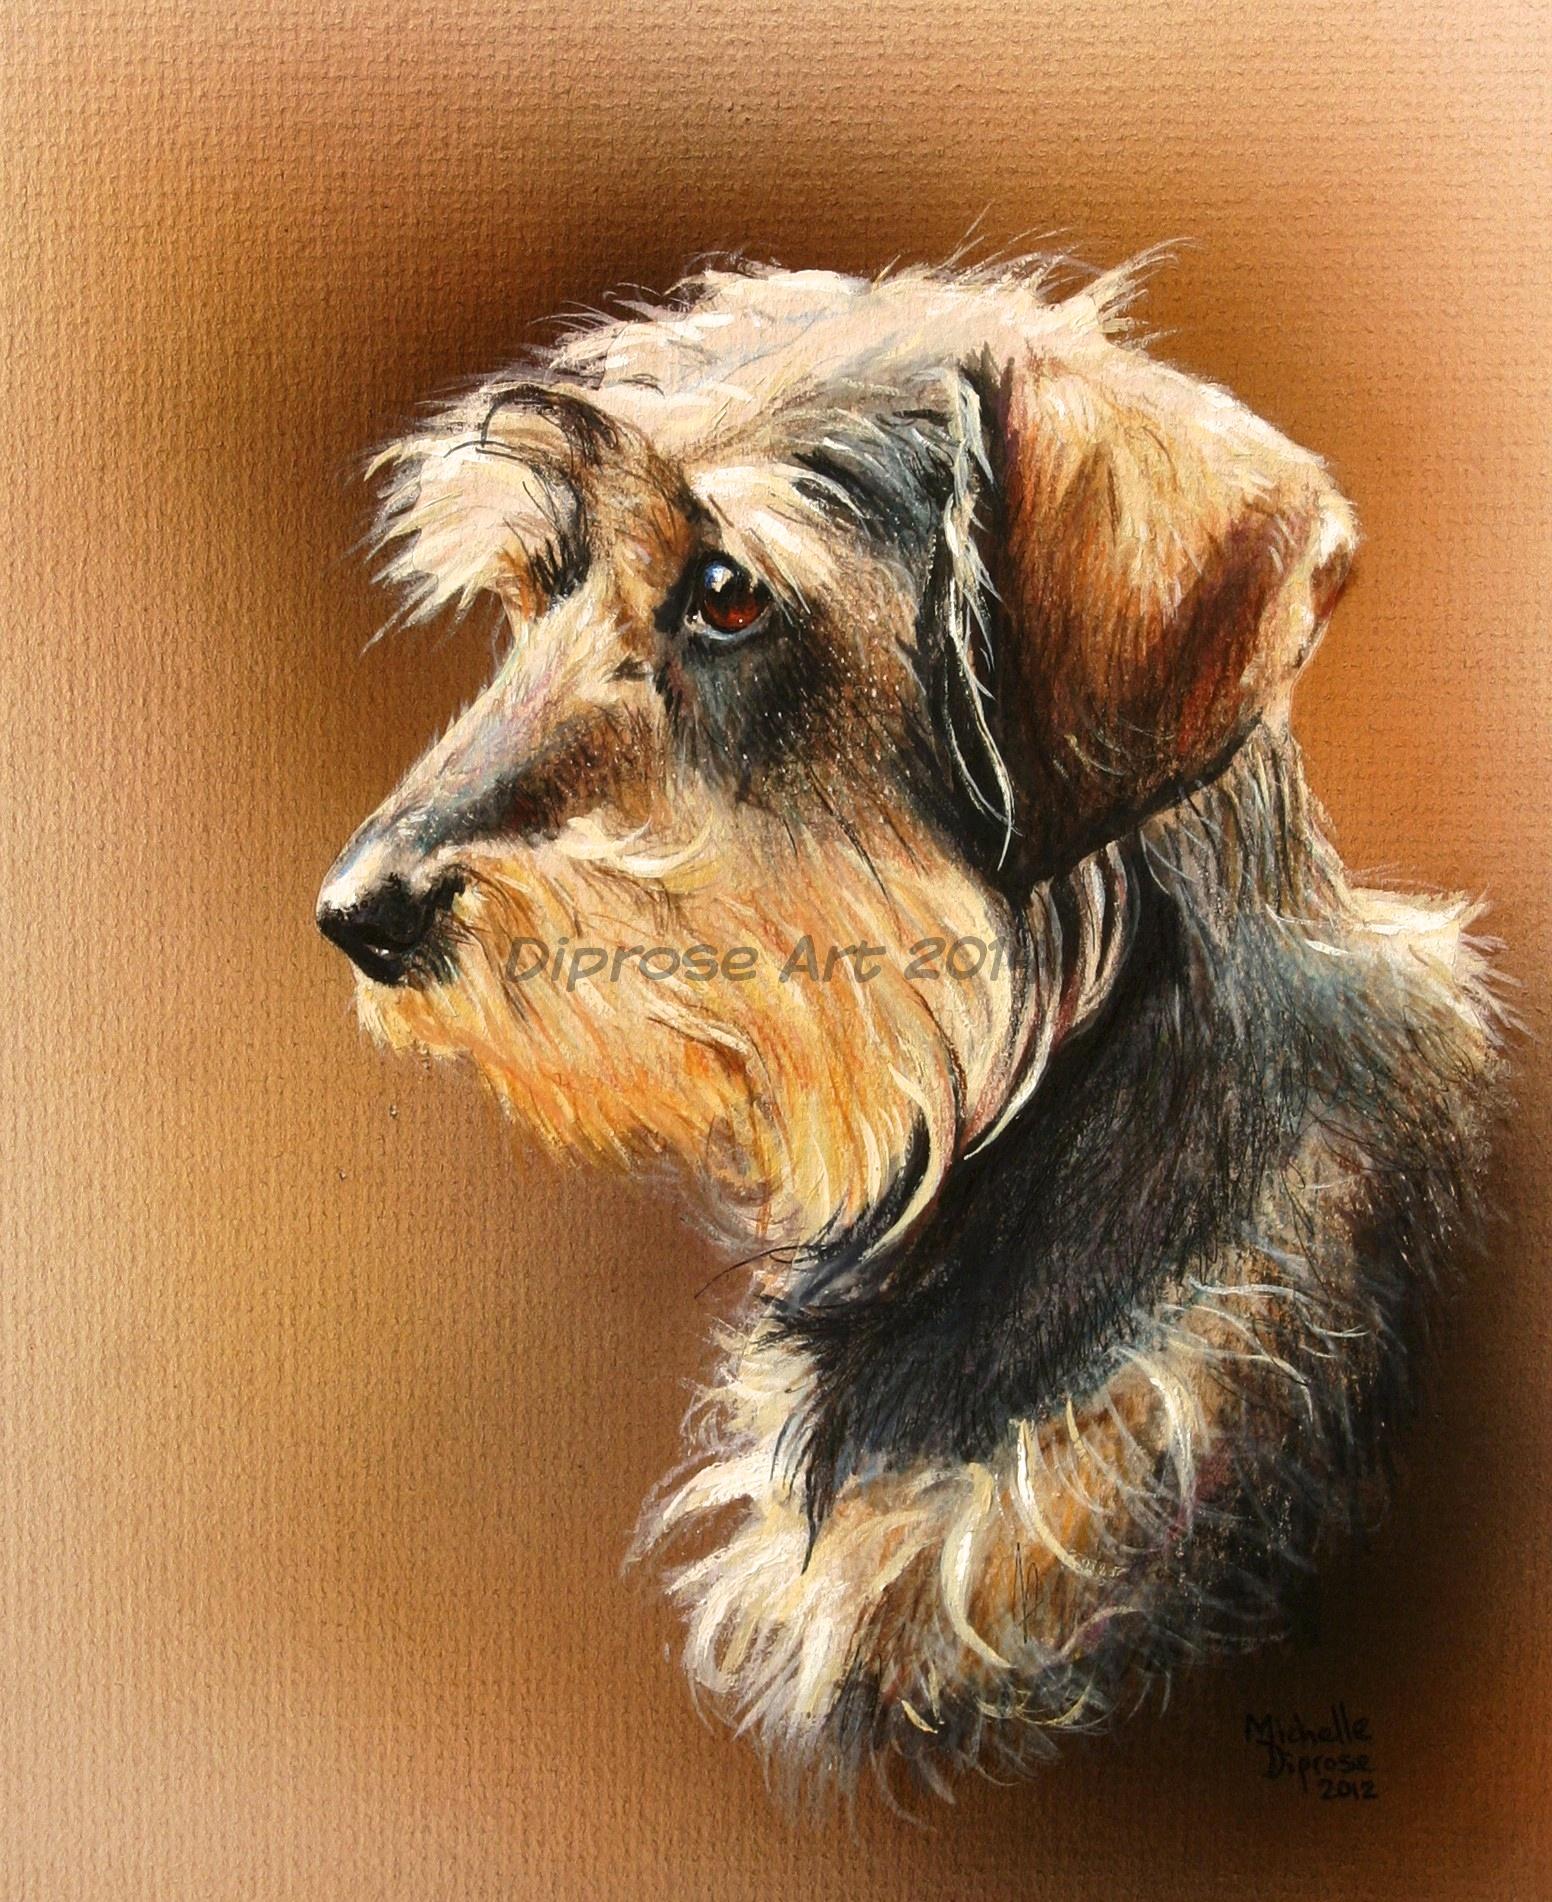 Acrylics on board - approx A4 - pet dog portrait - nice side profile of Monty the Dachshund showing his lovely wiry beard off!